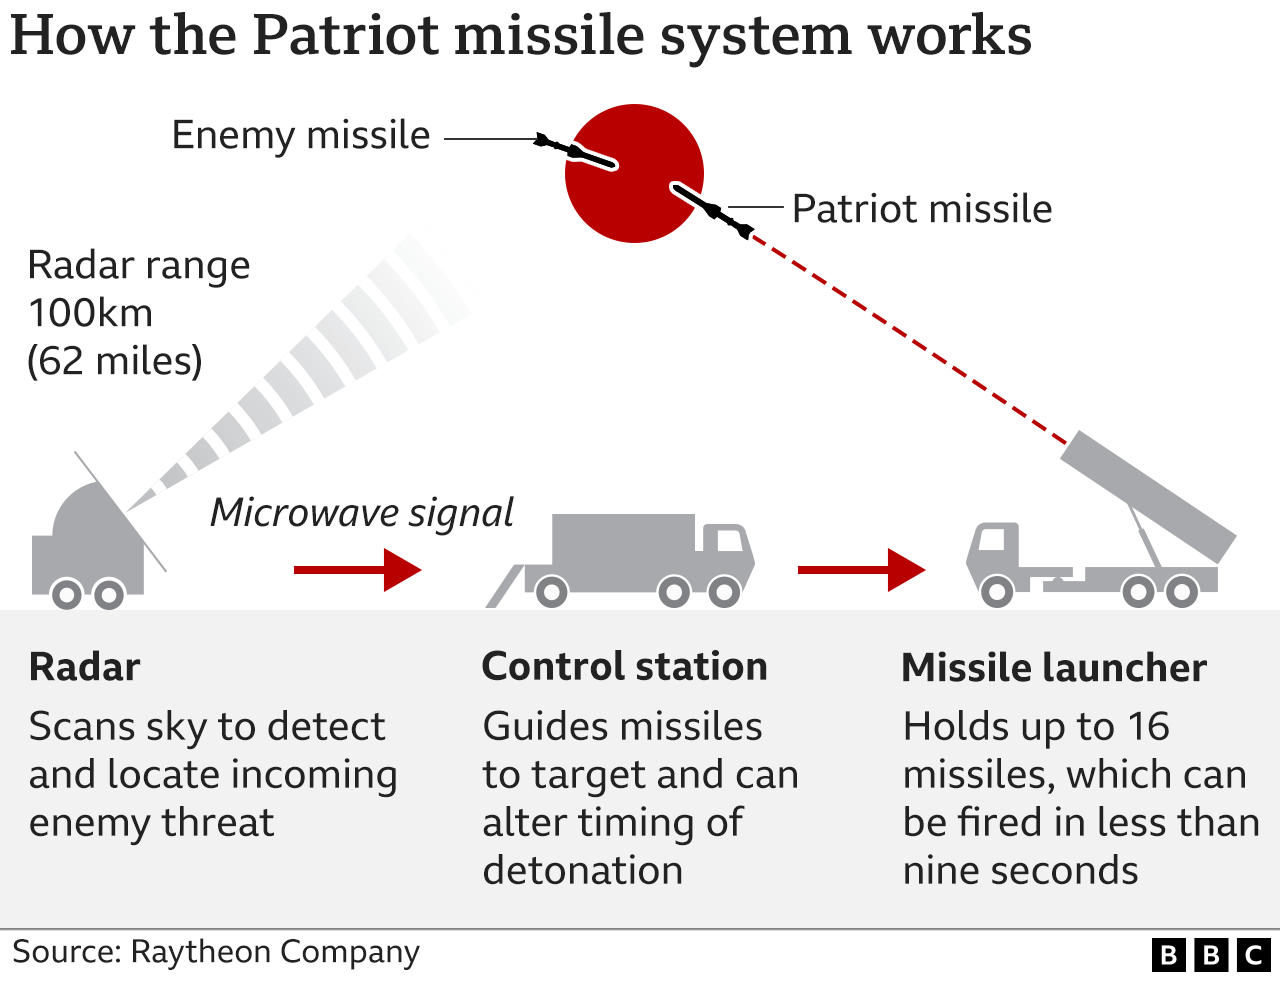 Graphic showing how the radar, control station and missile launcher of the Patriot missile system work to detect, target and destroy enemy threats.